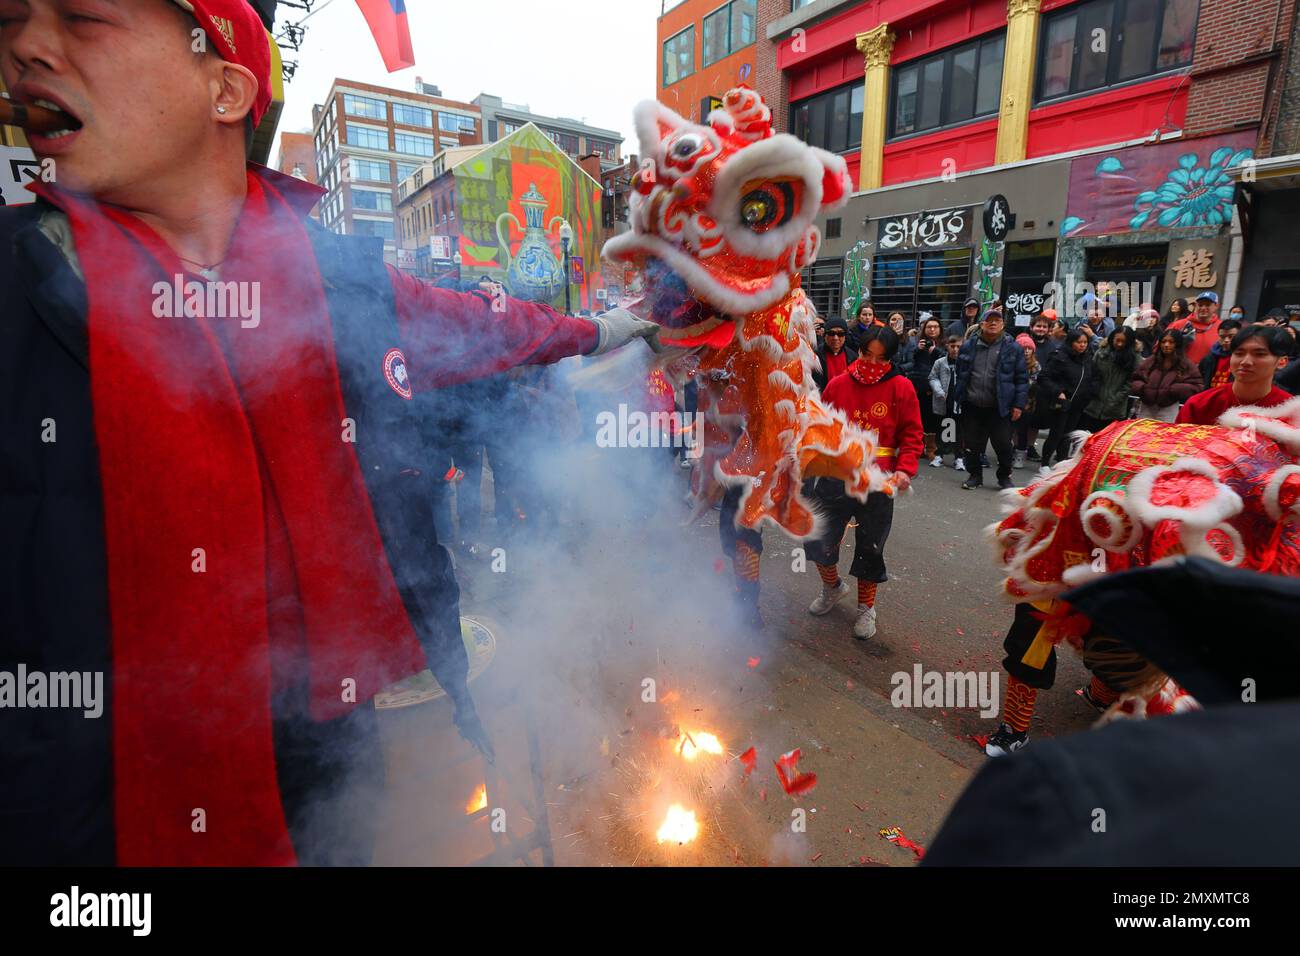 Wong Family Benevolent Lion Dance Team and exploding firecrackers in Boston Chinatown during Spring Festival, Chinese New Year, January 29, 2023. Stock Photo